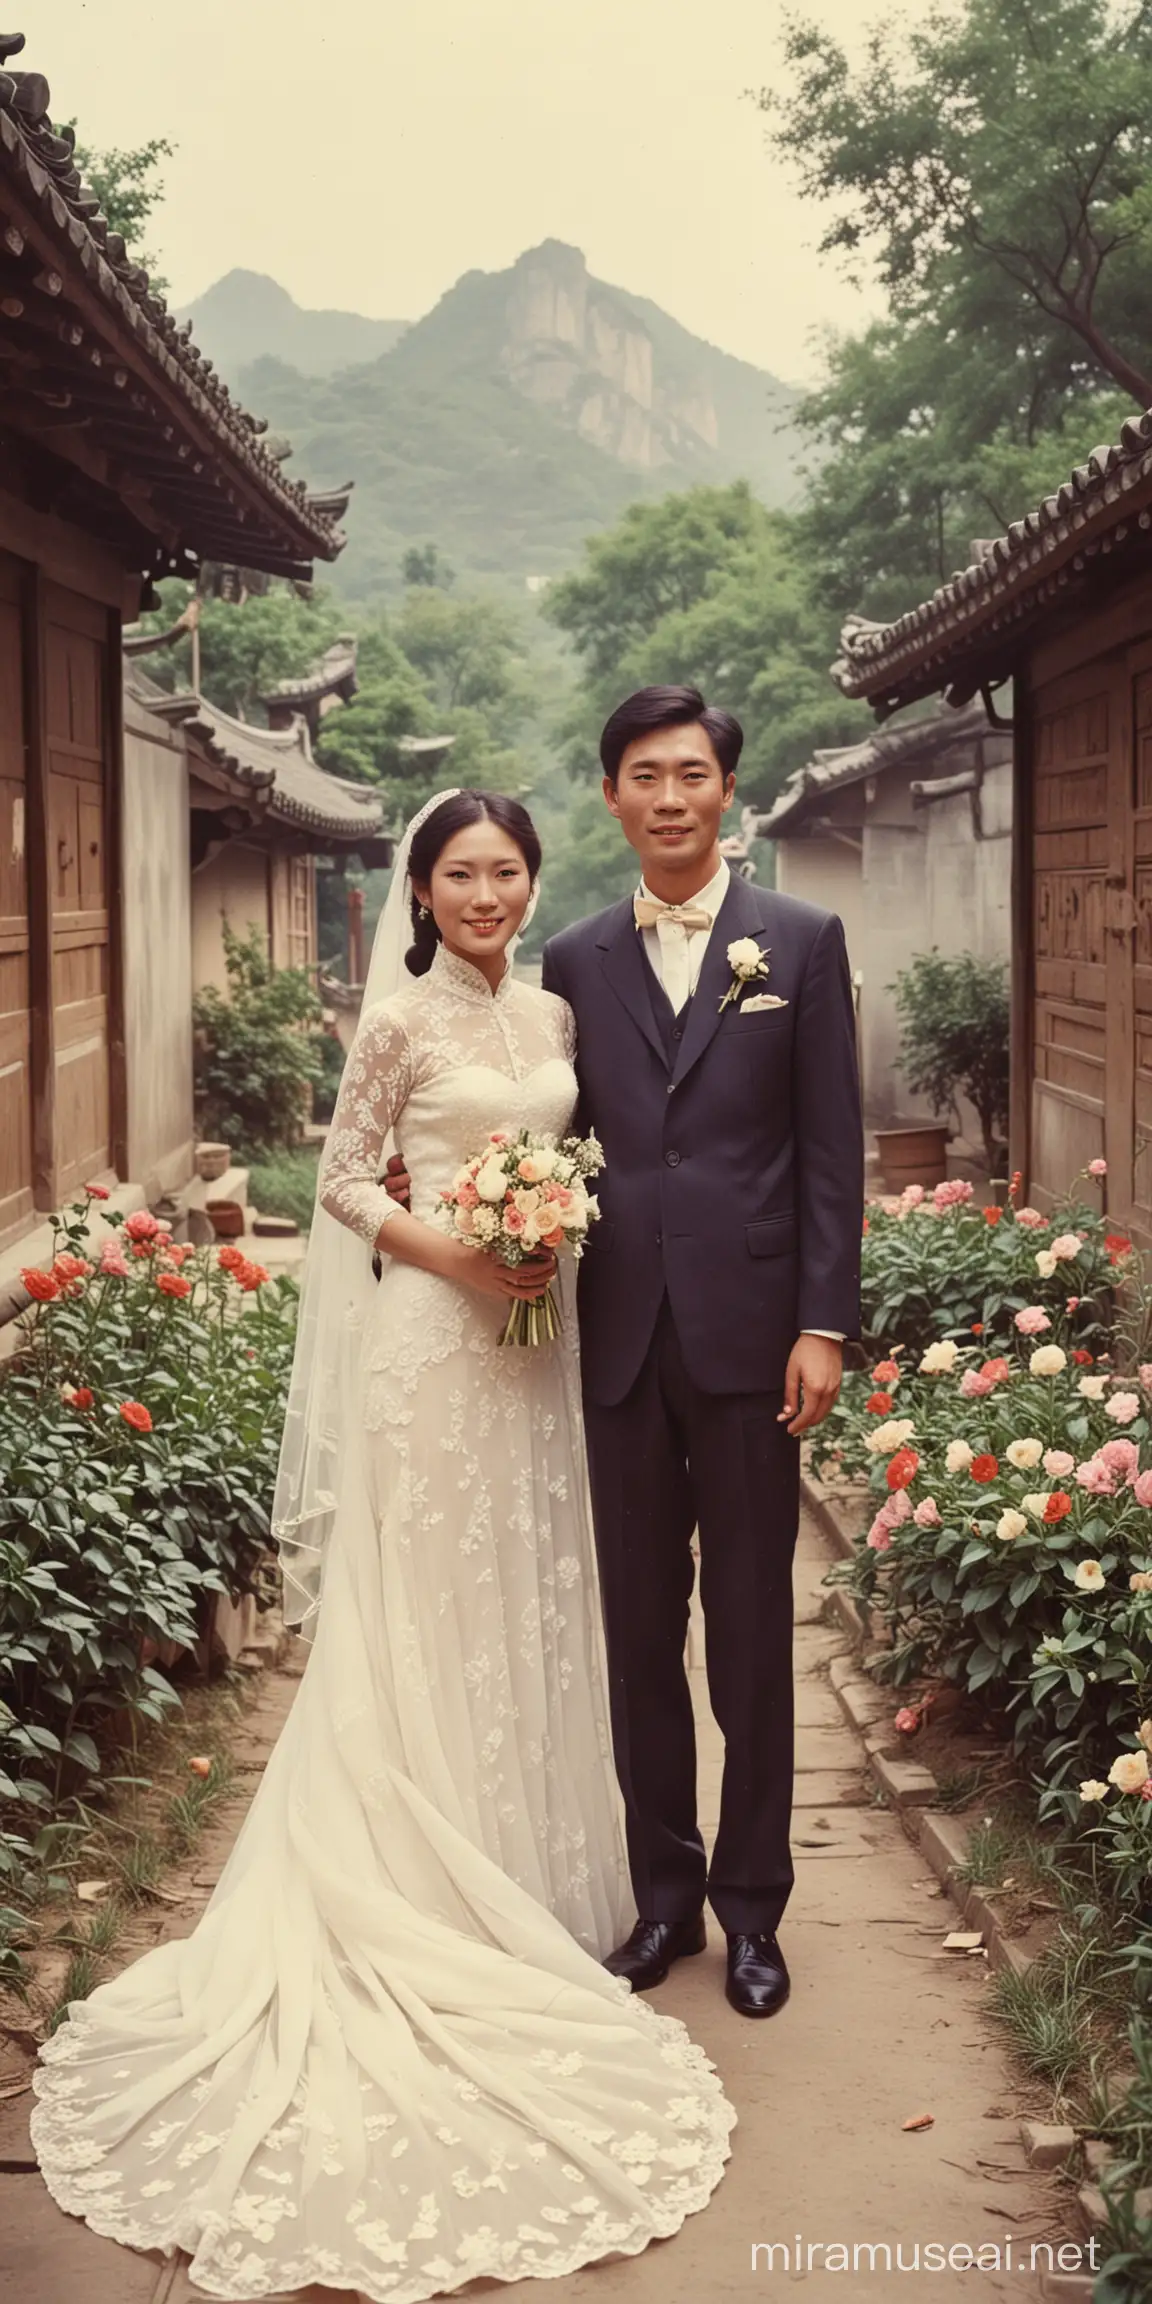 Vintage Chinese Wedding 1970s Newlyweds in Traditional Attire